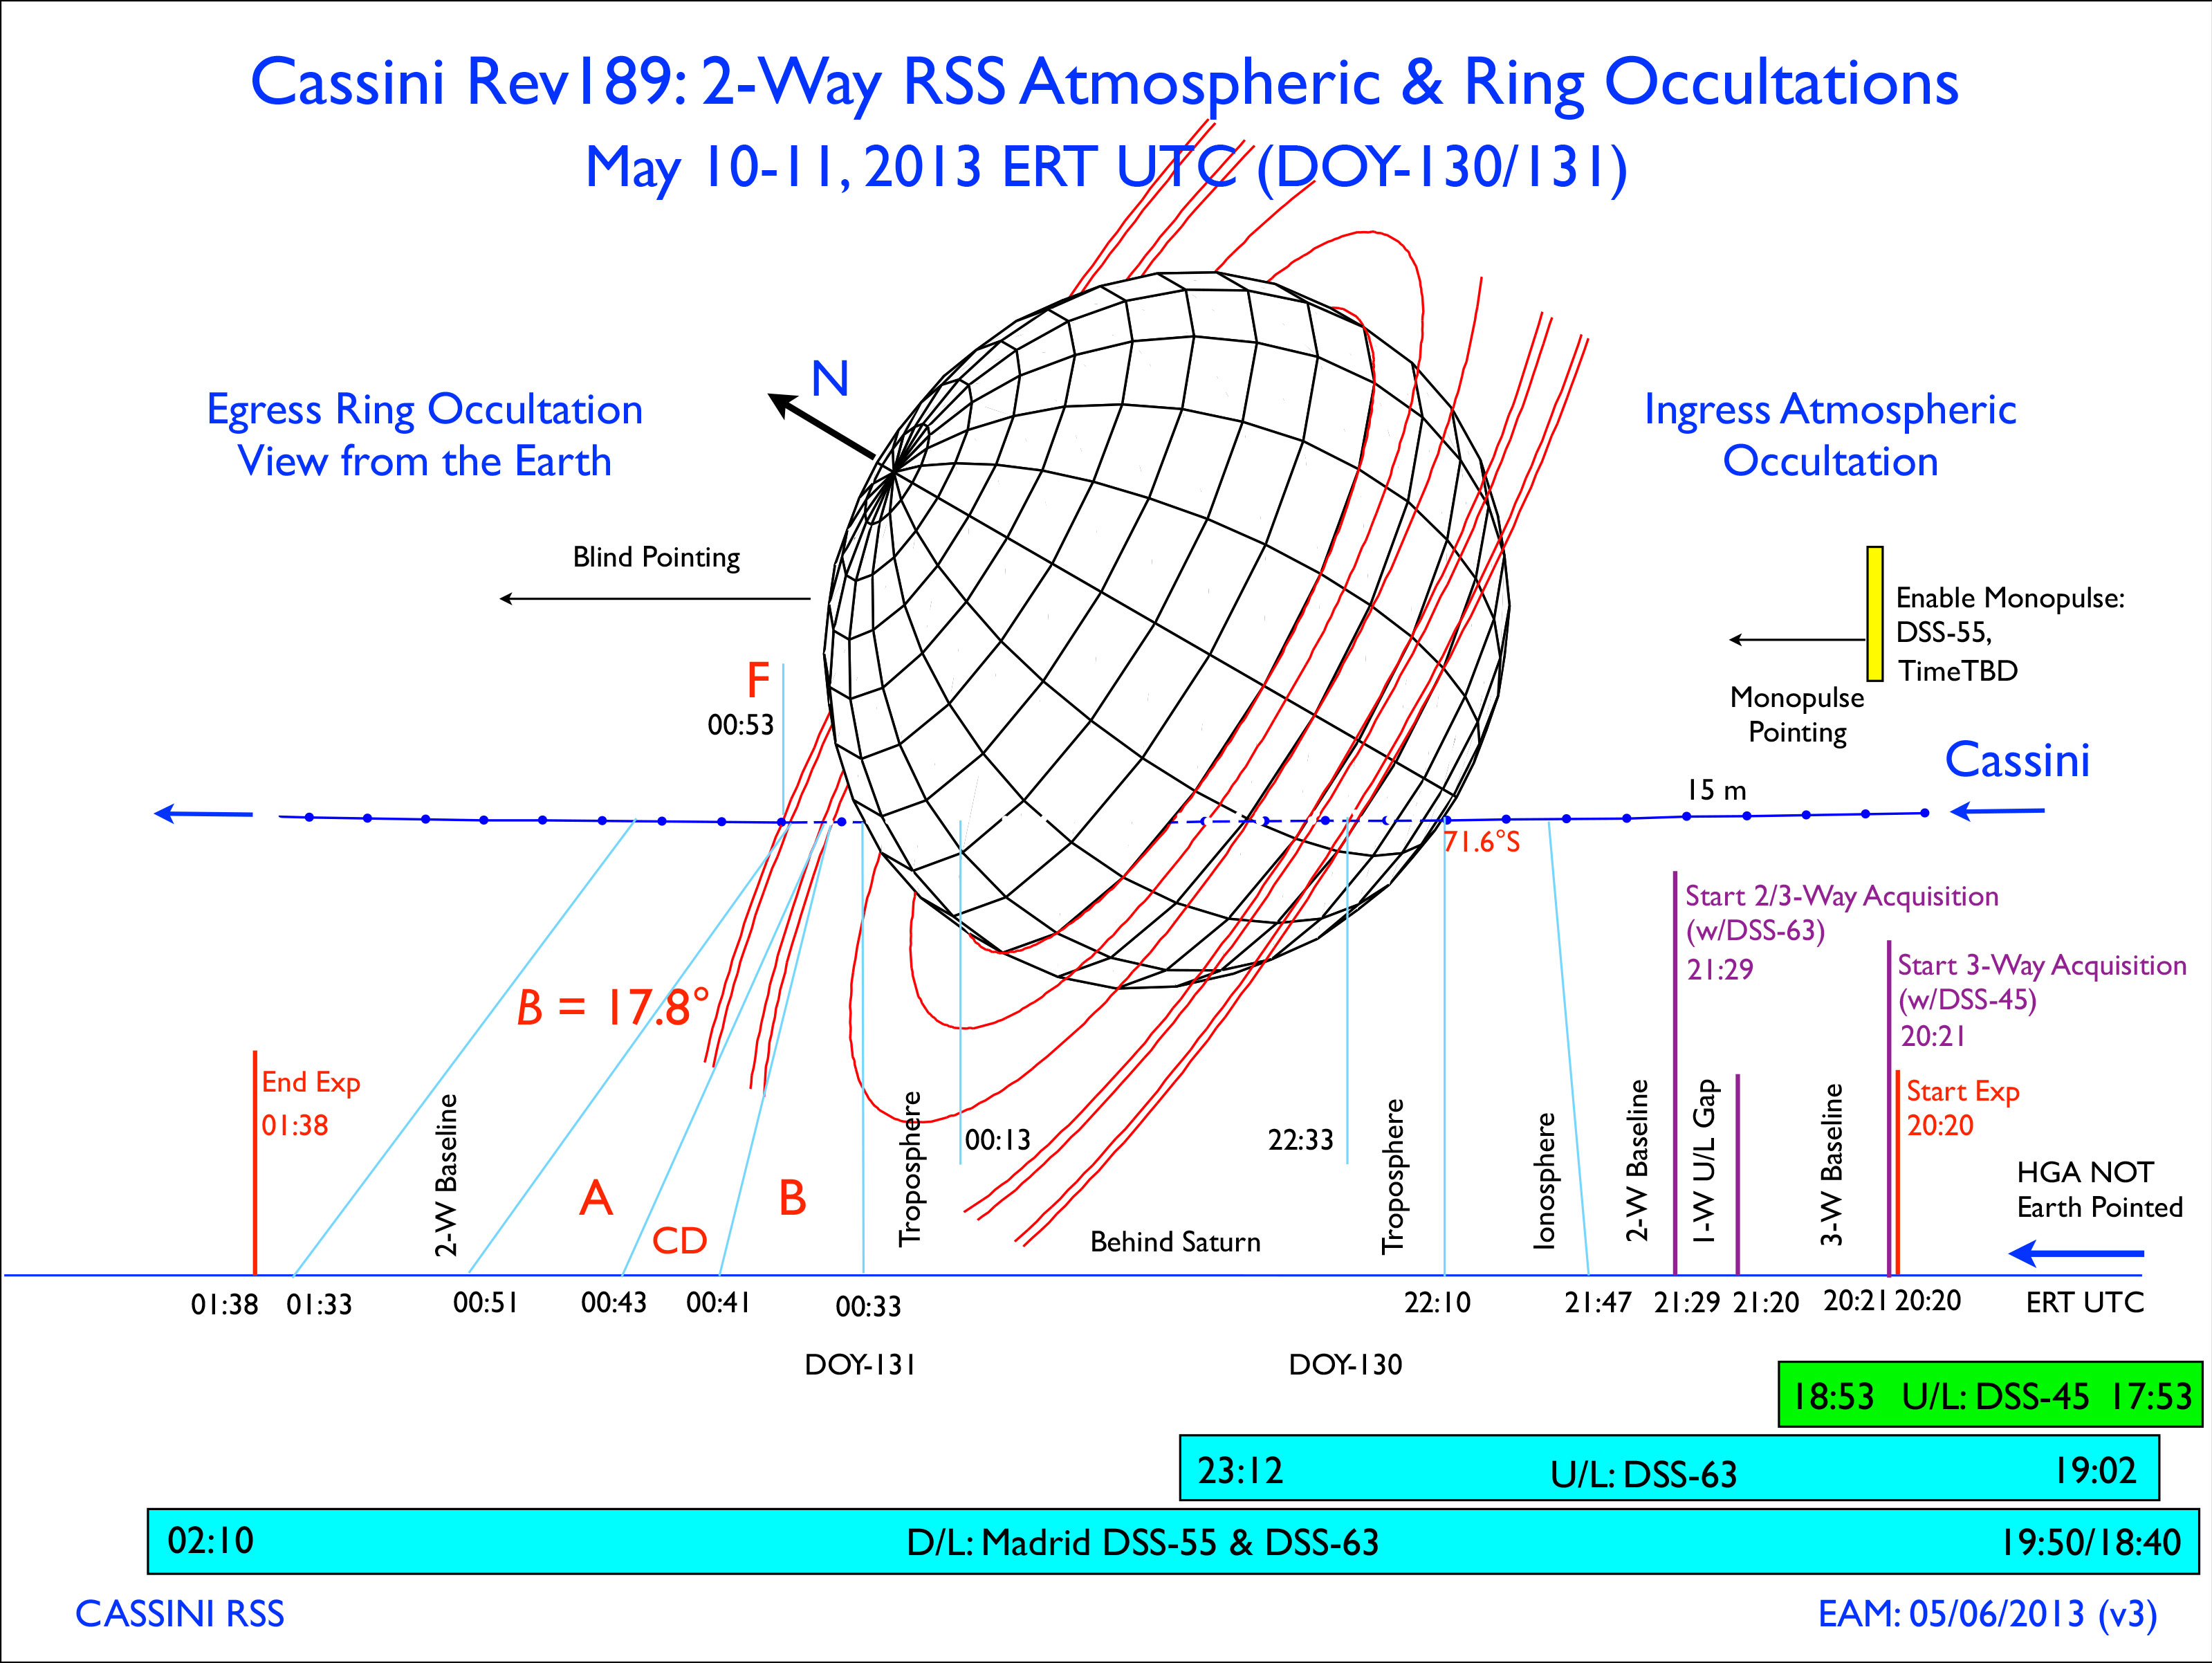 This graphic illustrates the Radio Science Occultation Experiment conducted on Friday May 10, 2013